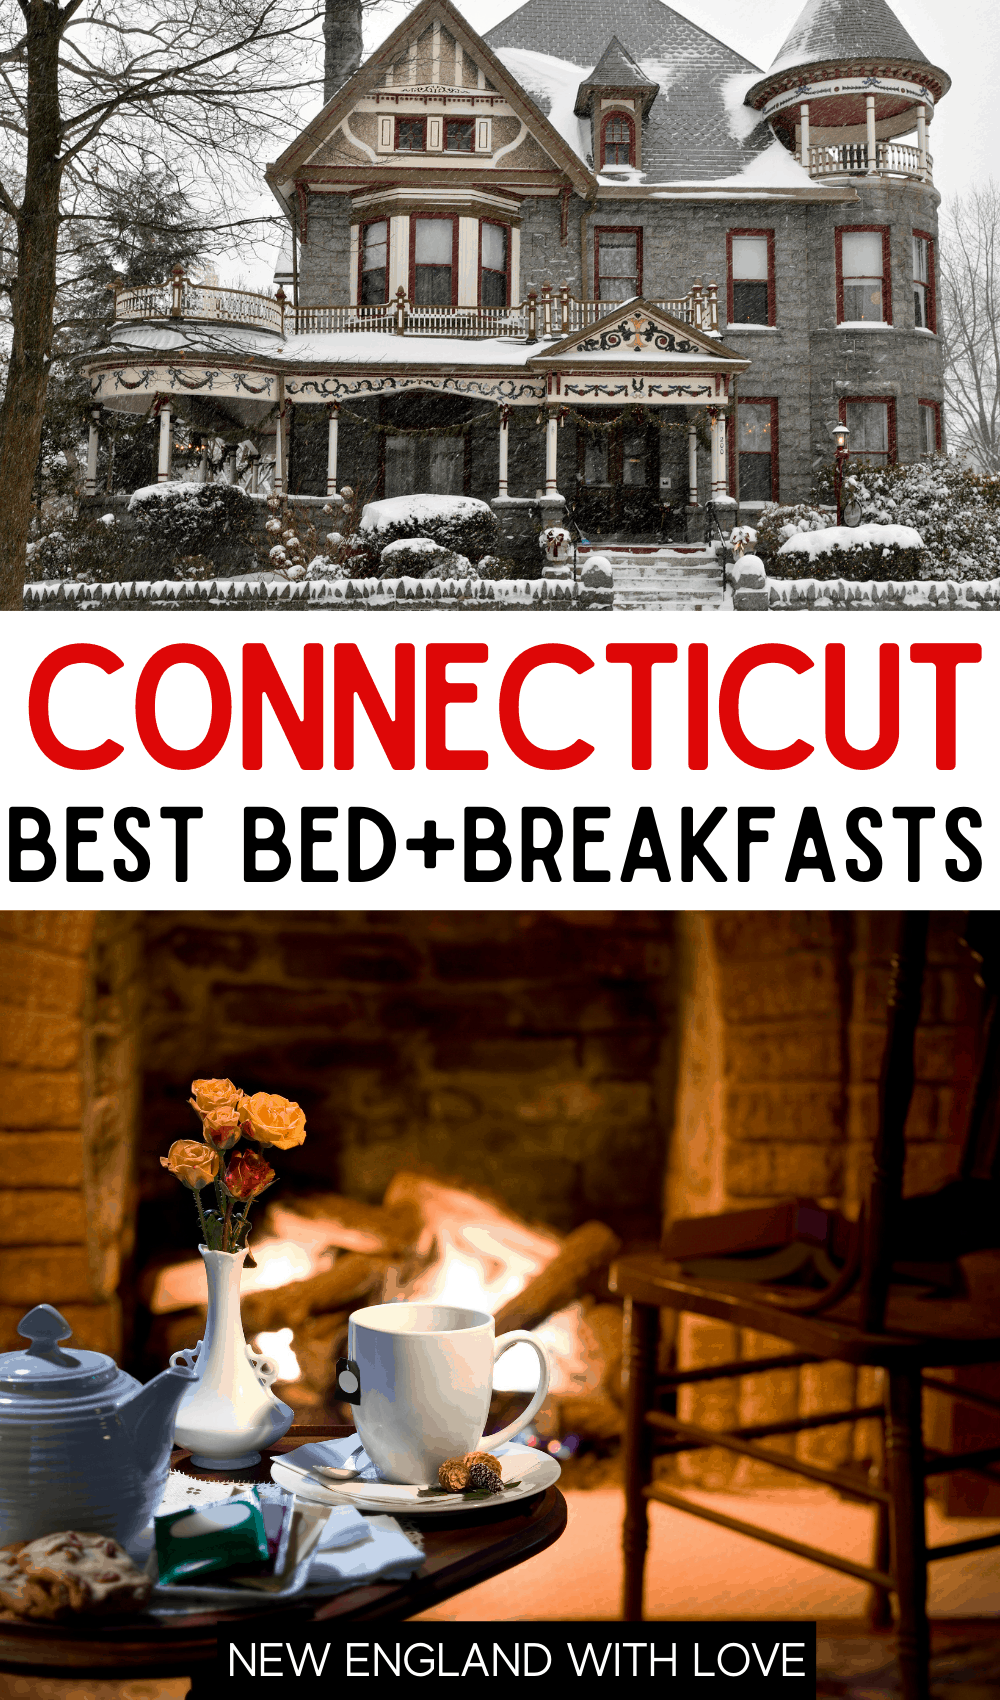 Pinterest graphic reading "CONNECTICUT BEST BED & BREAKFAST"